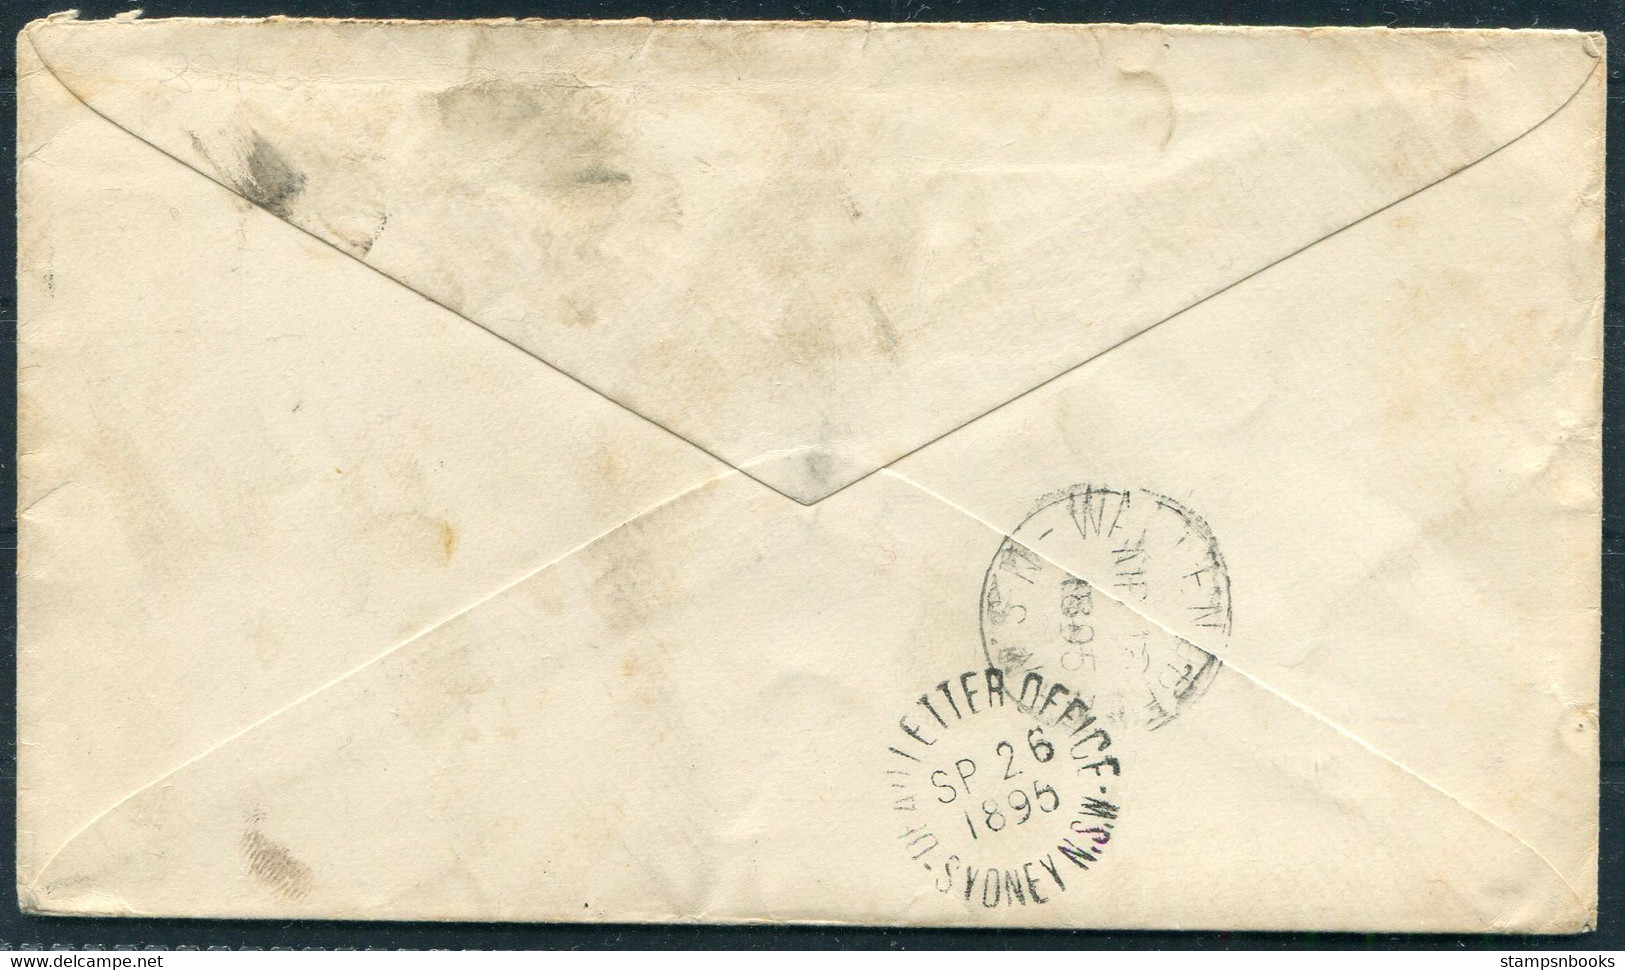 1895 Australia, New South Wales Stationery Cover Sydney - Wallendbeen "UNCLAIMED" Dead Letter Office D.L.O. - Briefe U. Dokumente